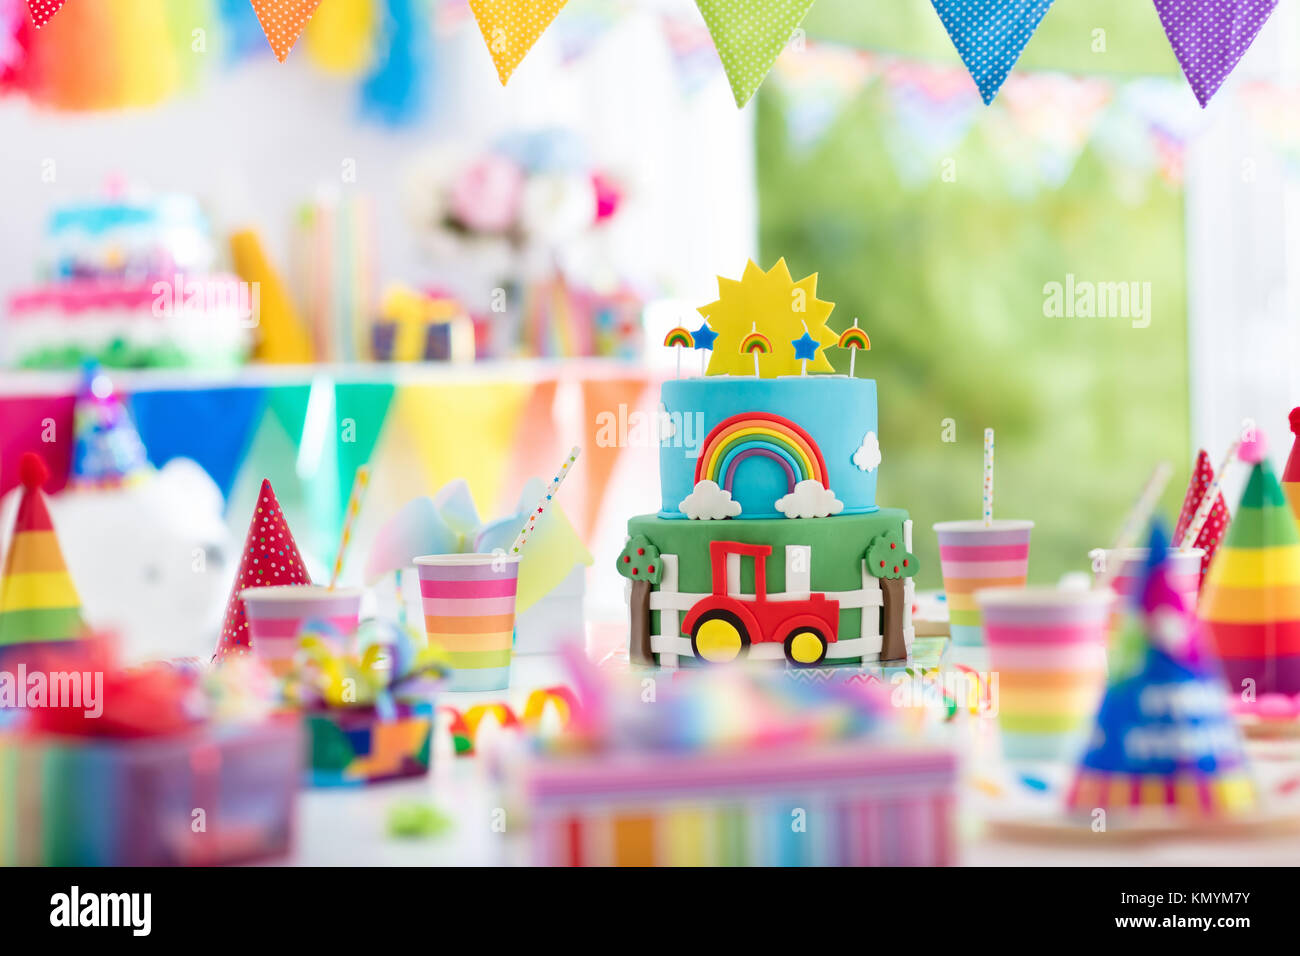 Kids birthday party decoration. Colorful cake with candles. Farm and transportation theme boys party. Decorated table for child birthday celebration.  Stock Photo